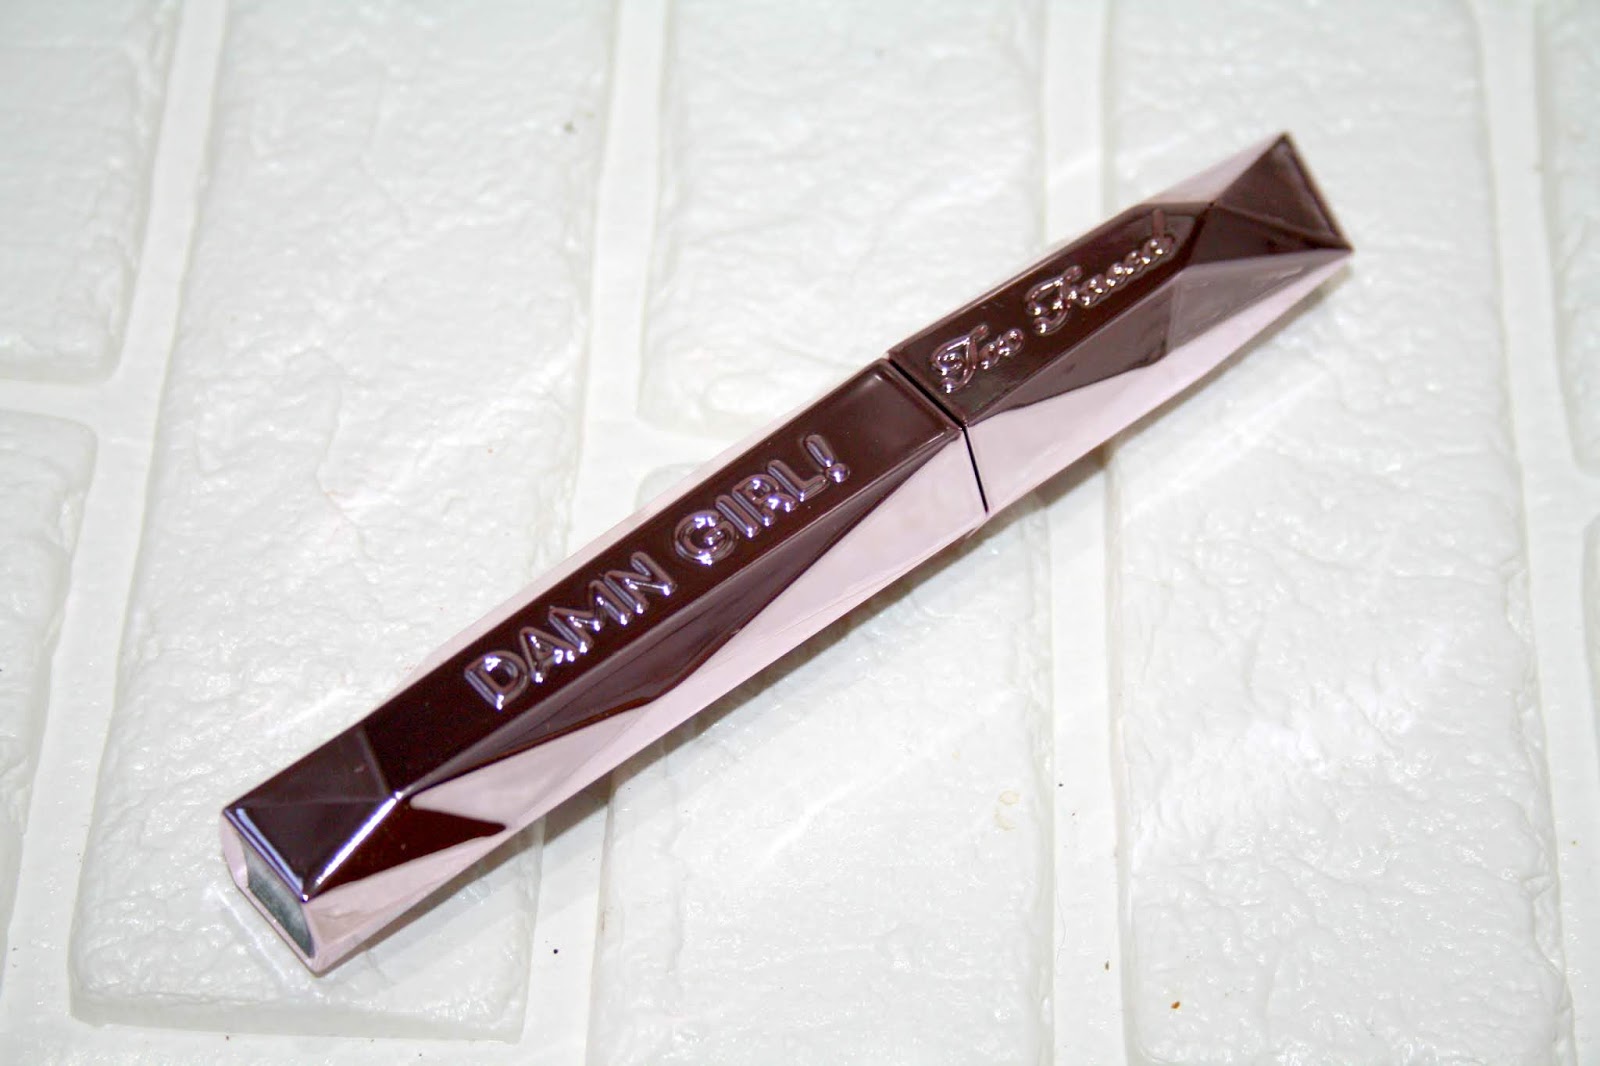 Beautyqueenuk | A UK Beauty and Lifestyle Blog: Too Faced Damn Girl Mascara